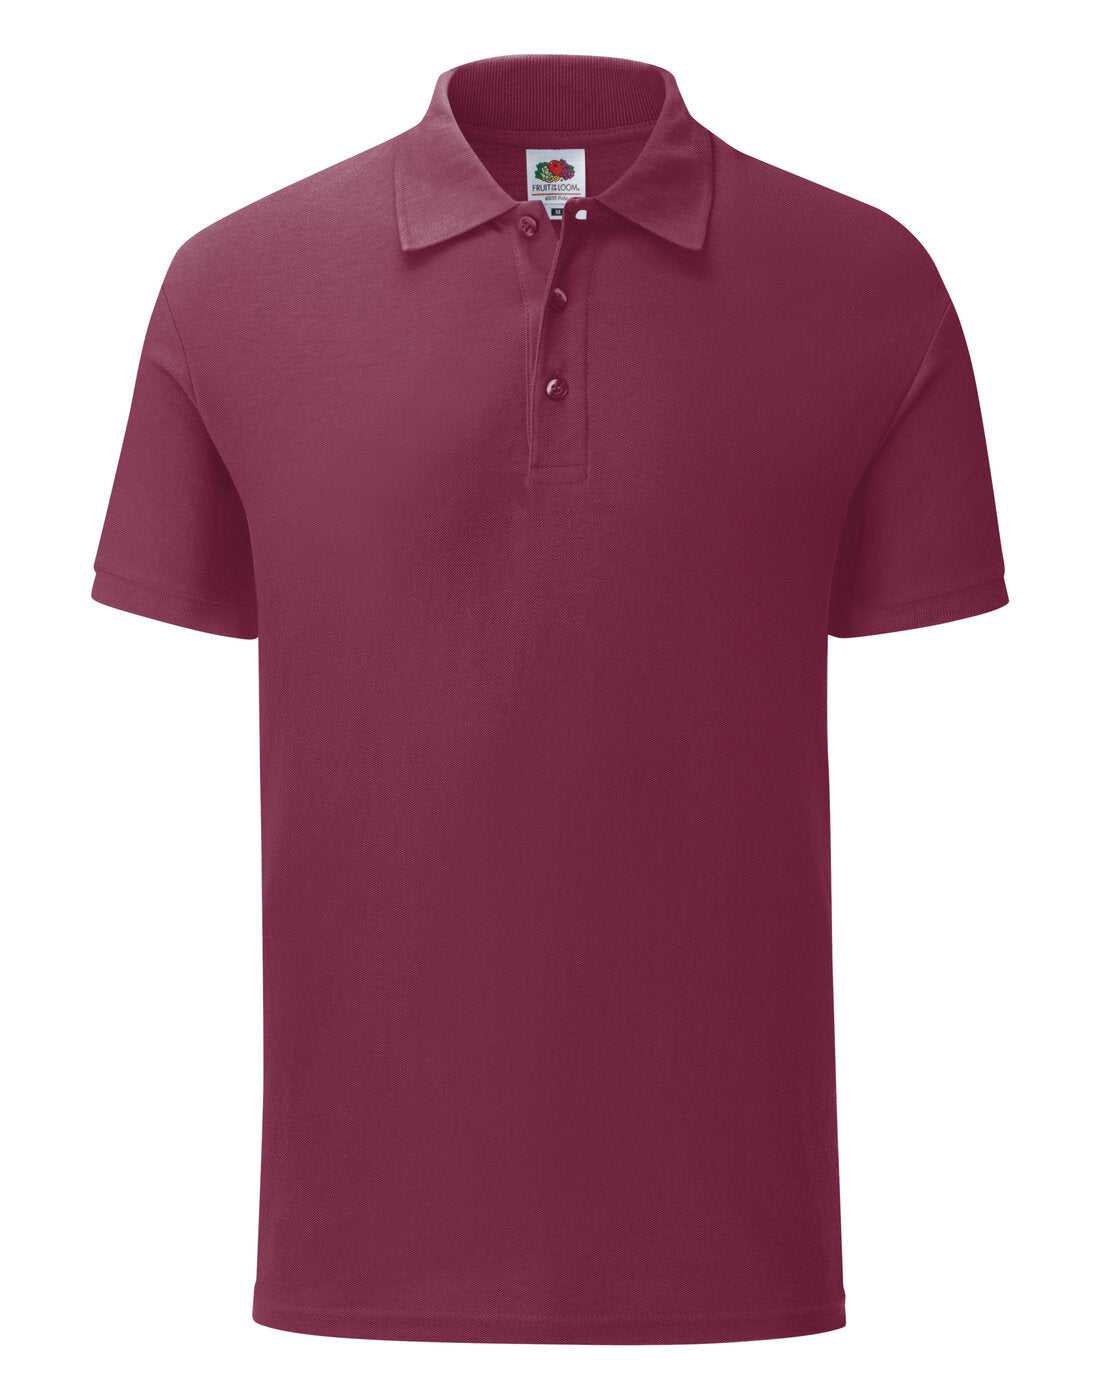 Fruit of the Loom 65/35 Tailored Fit Polo - Burgundy